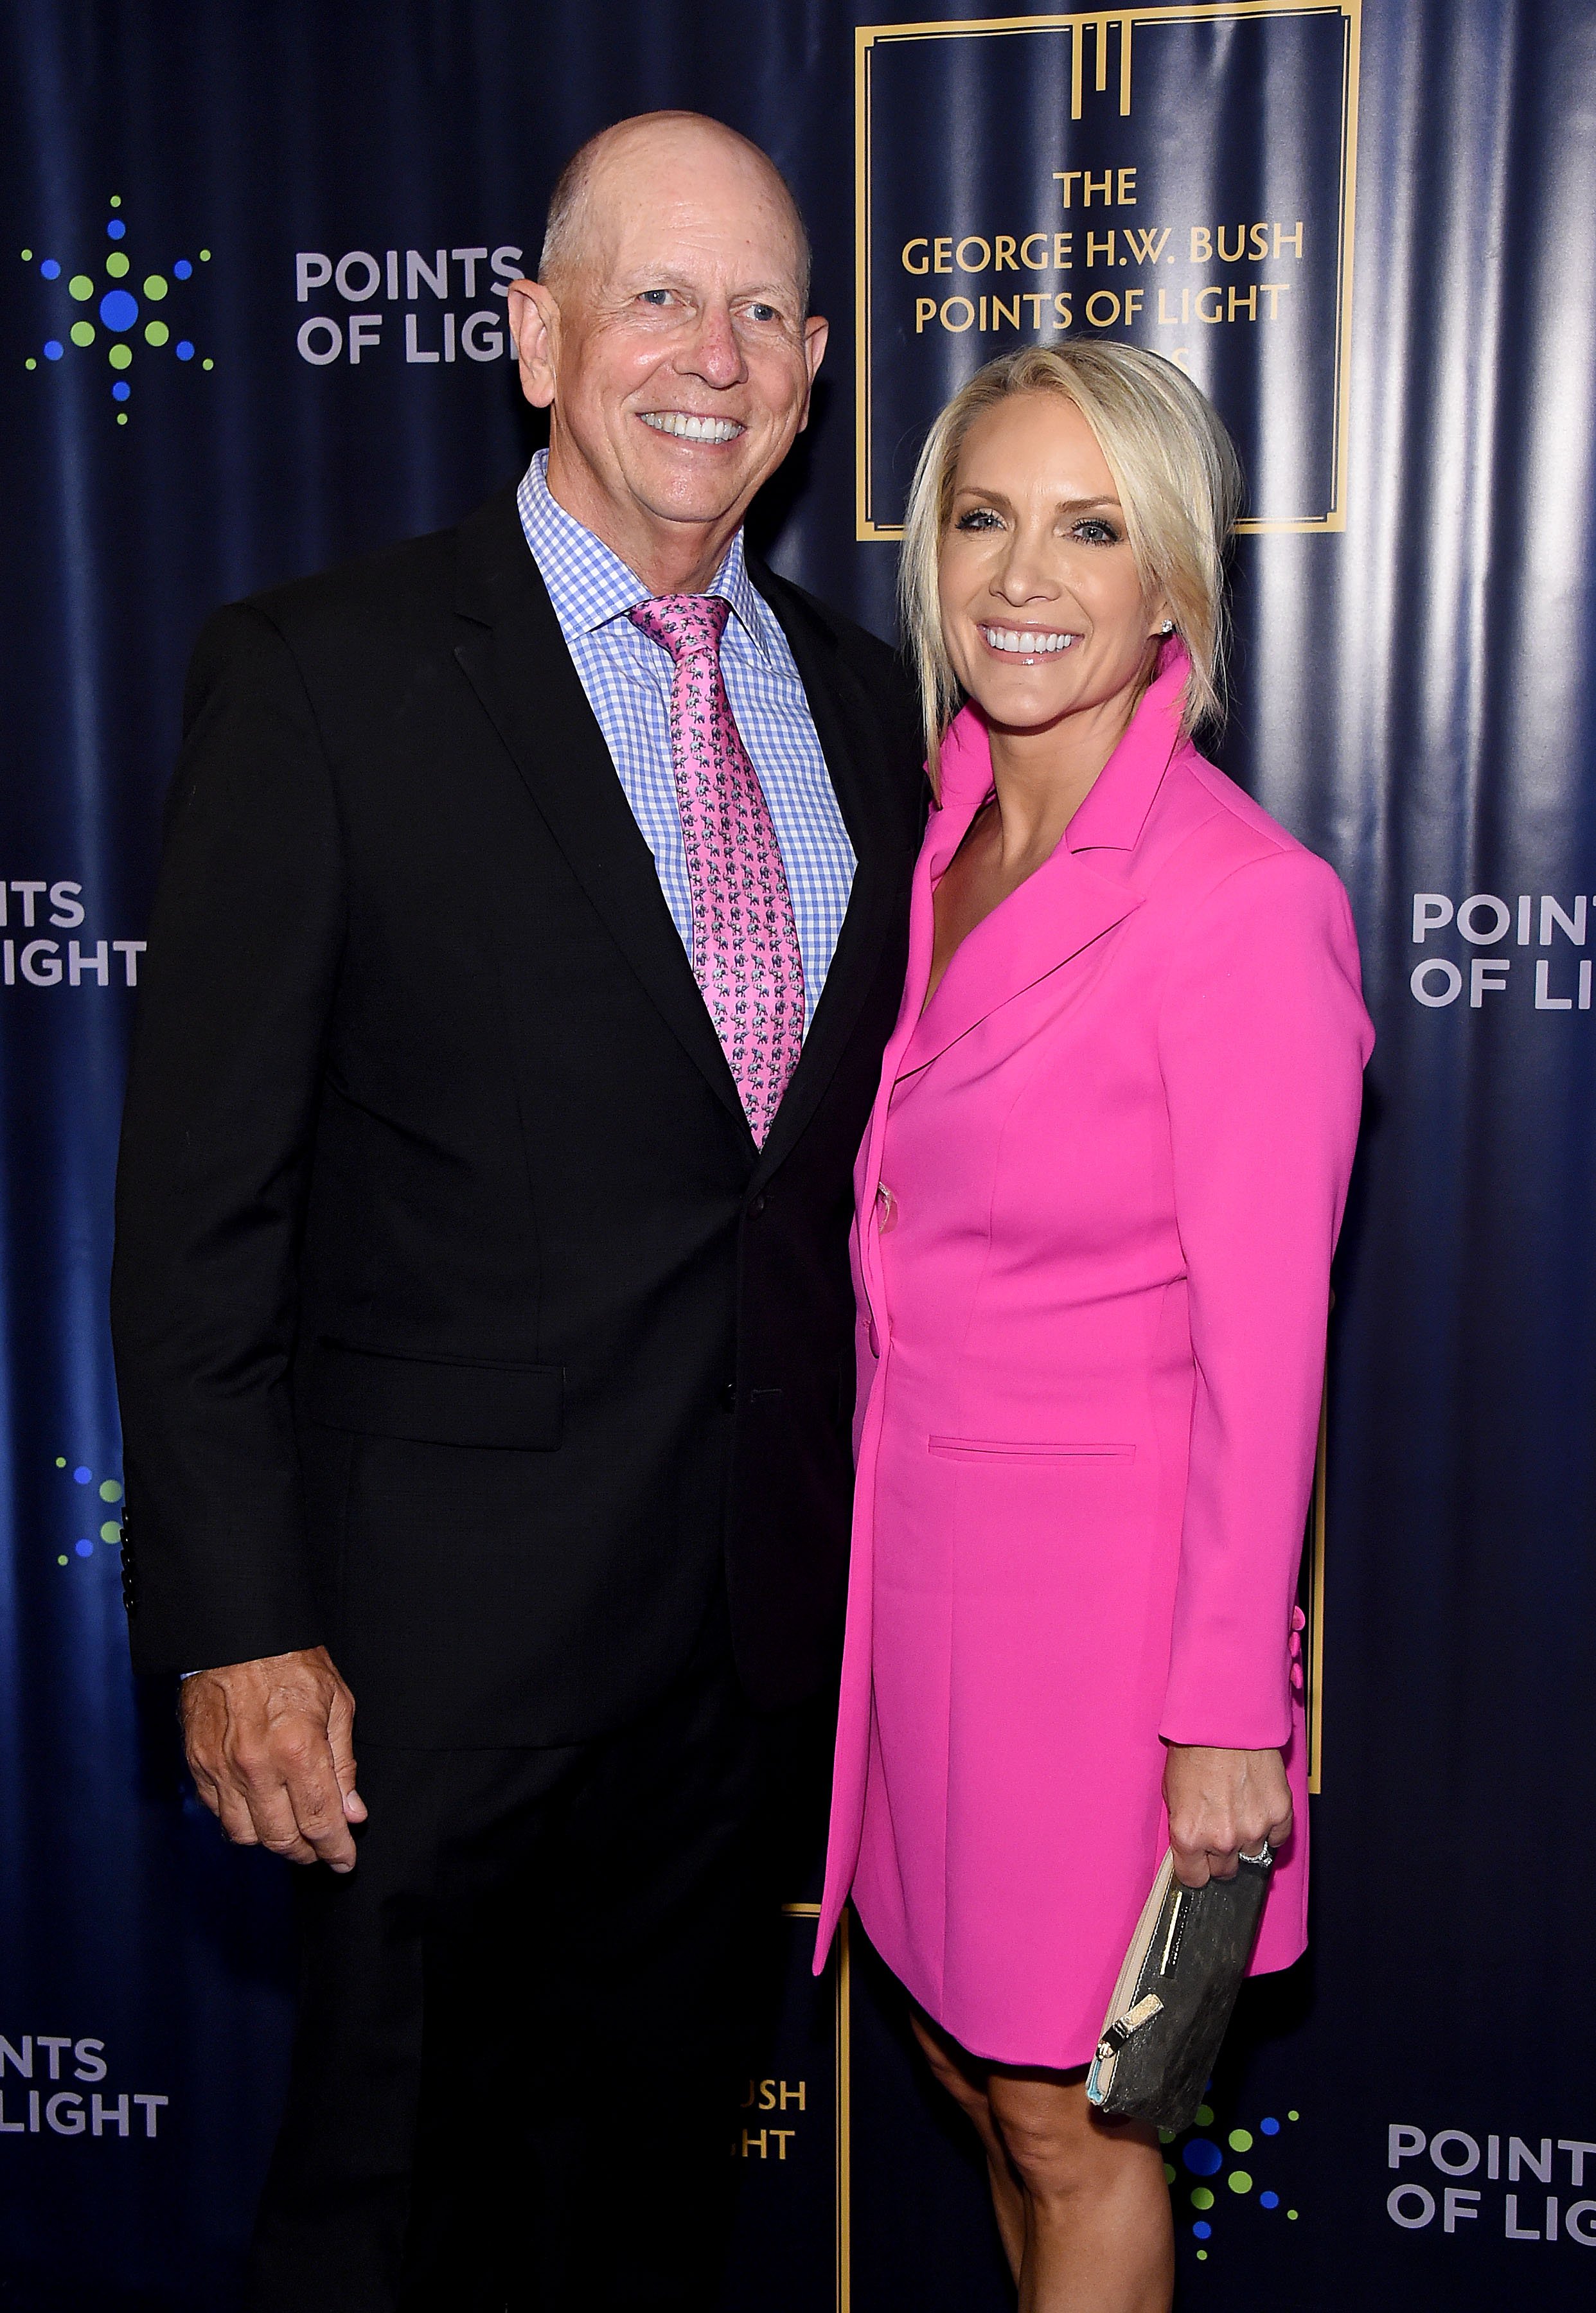 Peter Mcmahon Is A Successful Businessman And Dana Perino S Husband